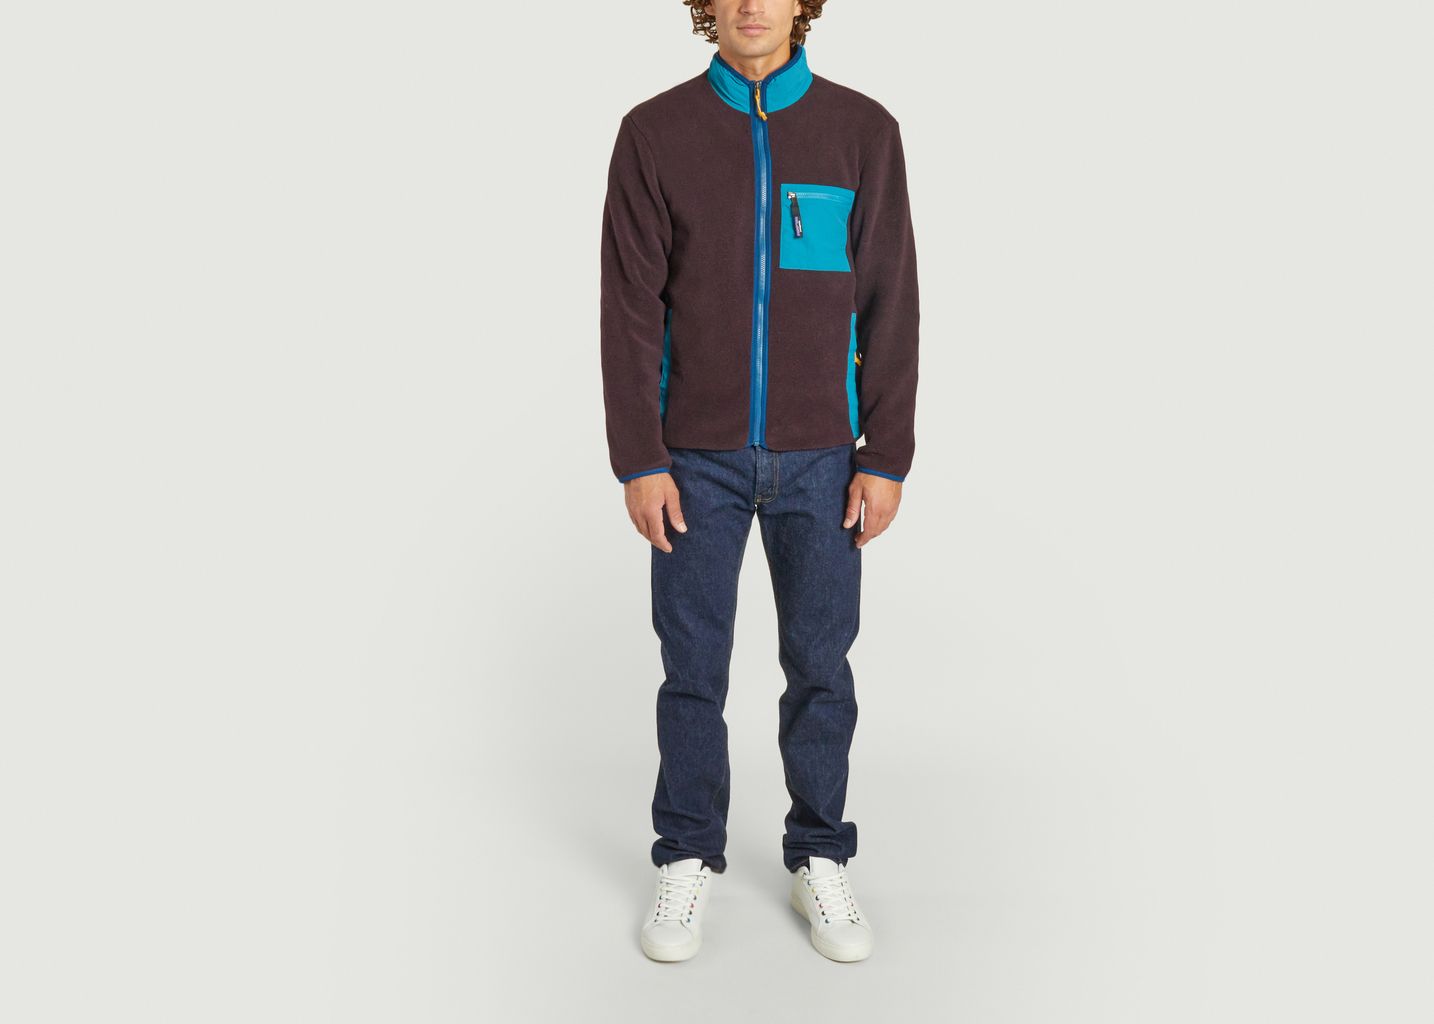 M's Synch Jkt - Patagonia